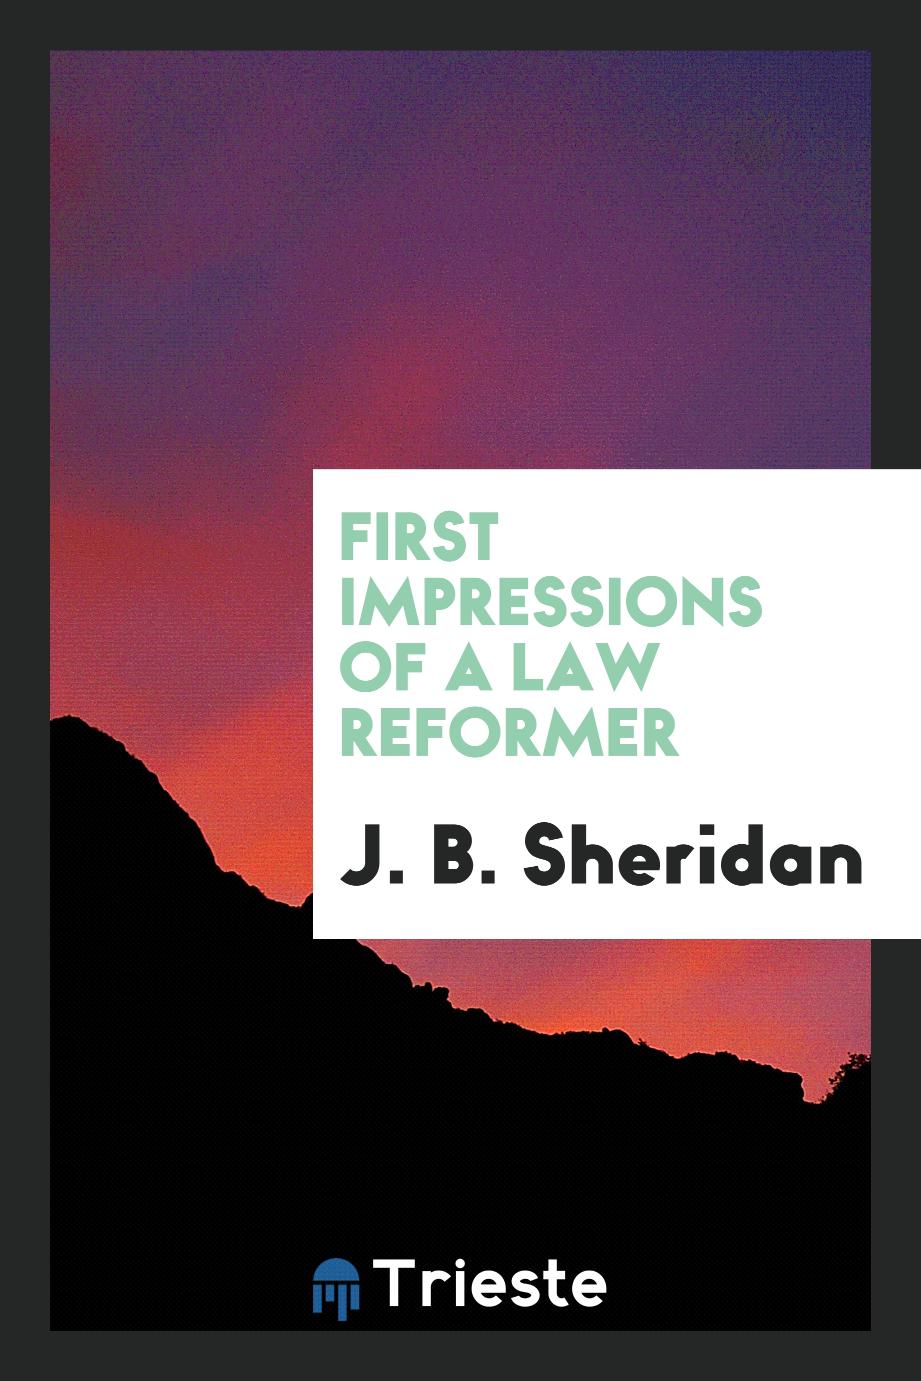 First impressions of a law reformer